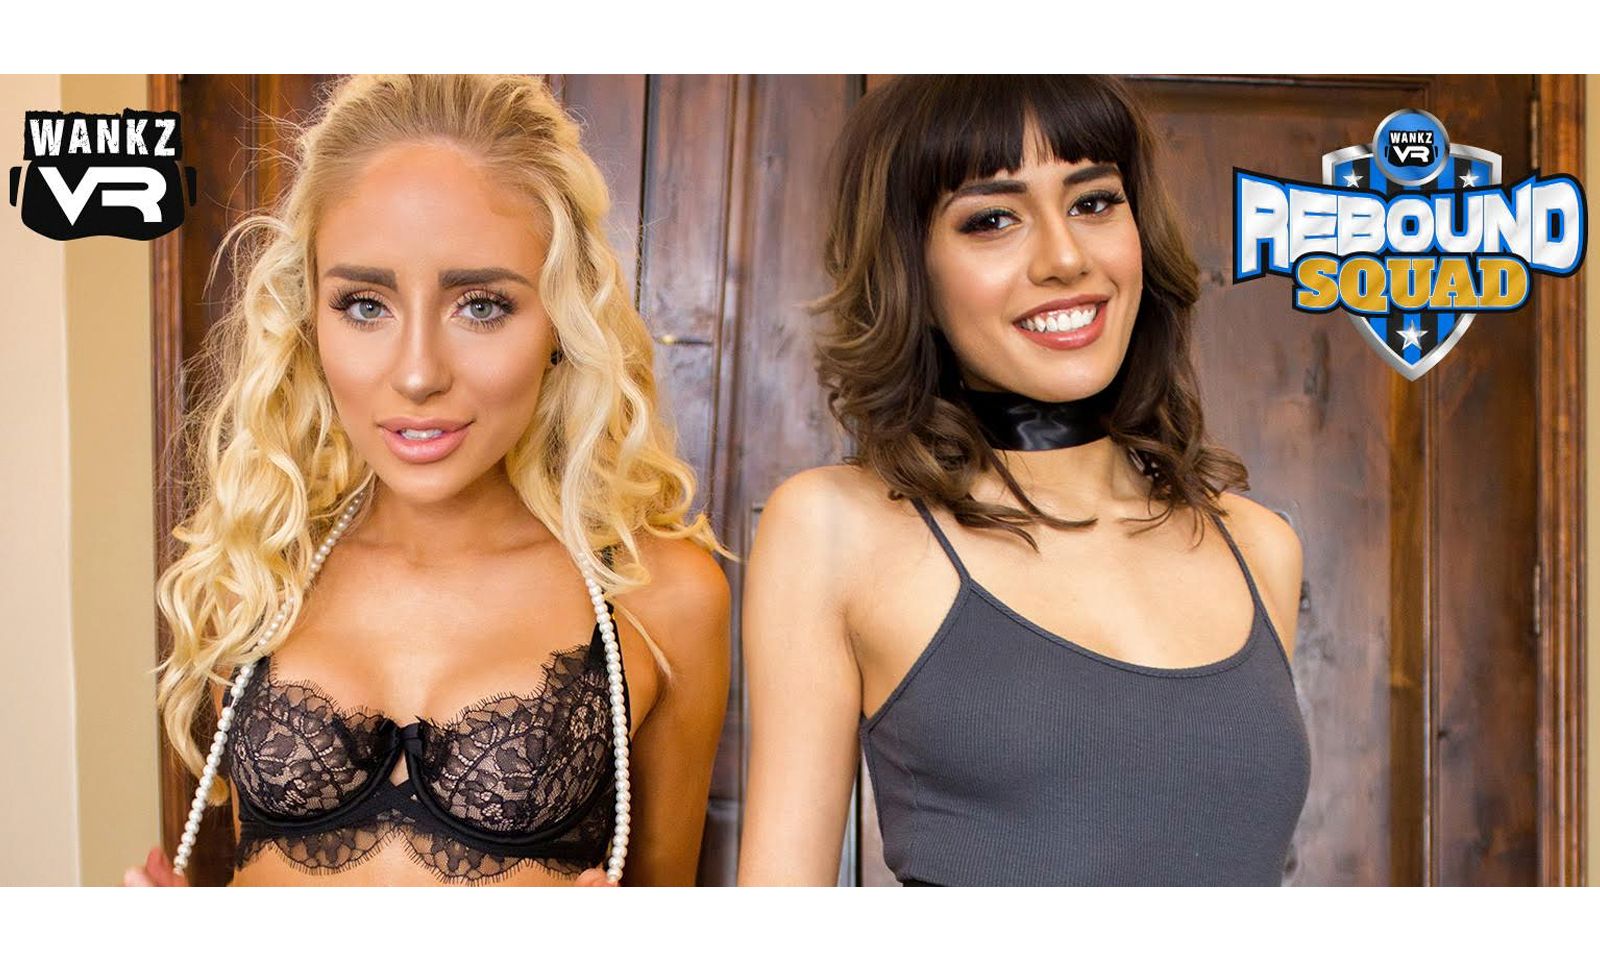 Janice Griffith, Naomi Woods in ‘WankzVR’s Rebound Squad,’ Out Now